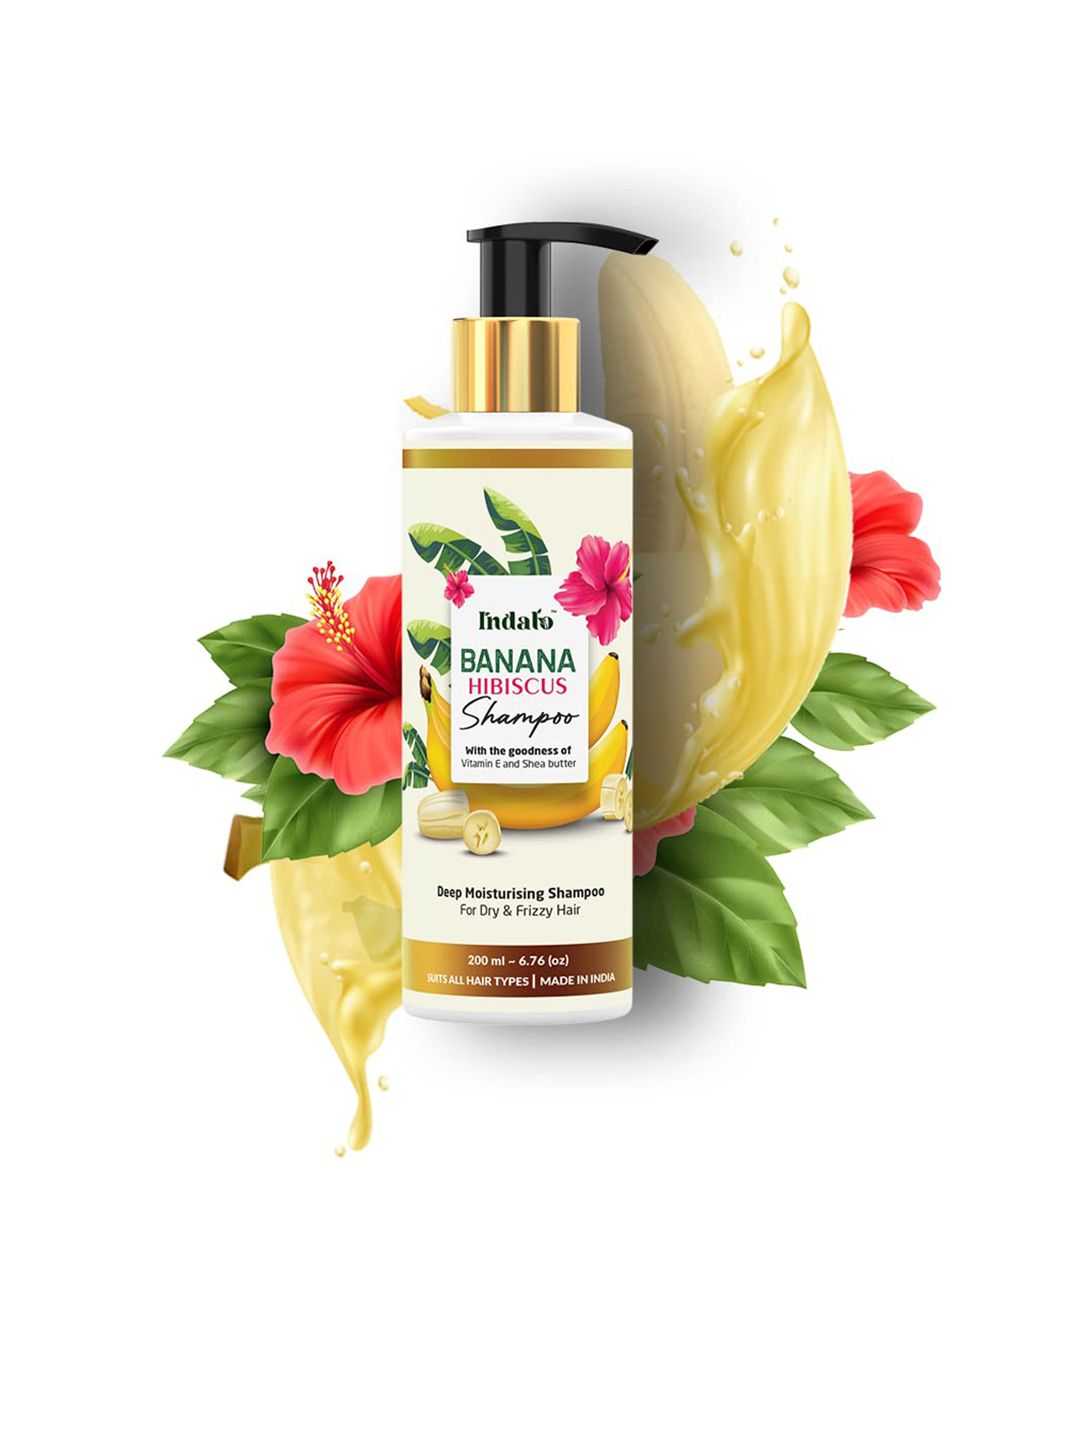 INDALO Banana Hibiscus Shampoo with Vitamin E & Shea Butter for Dry & Frizzy Hair - 200ml Price in India